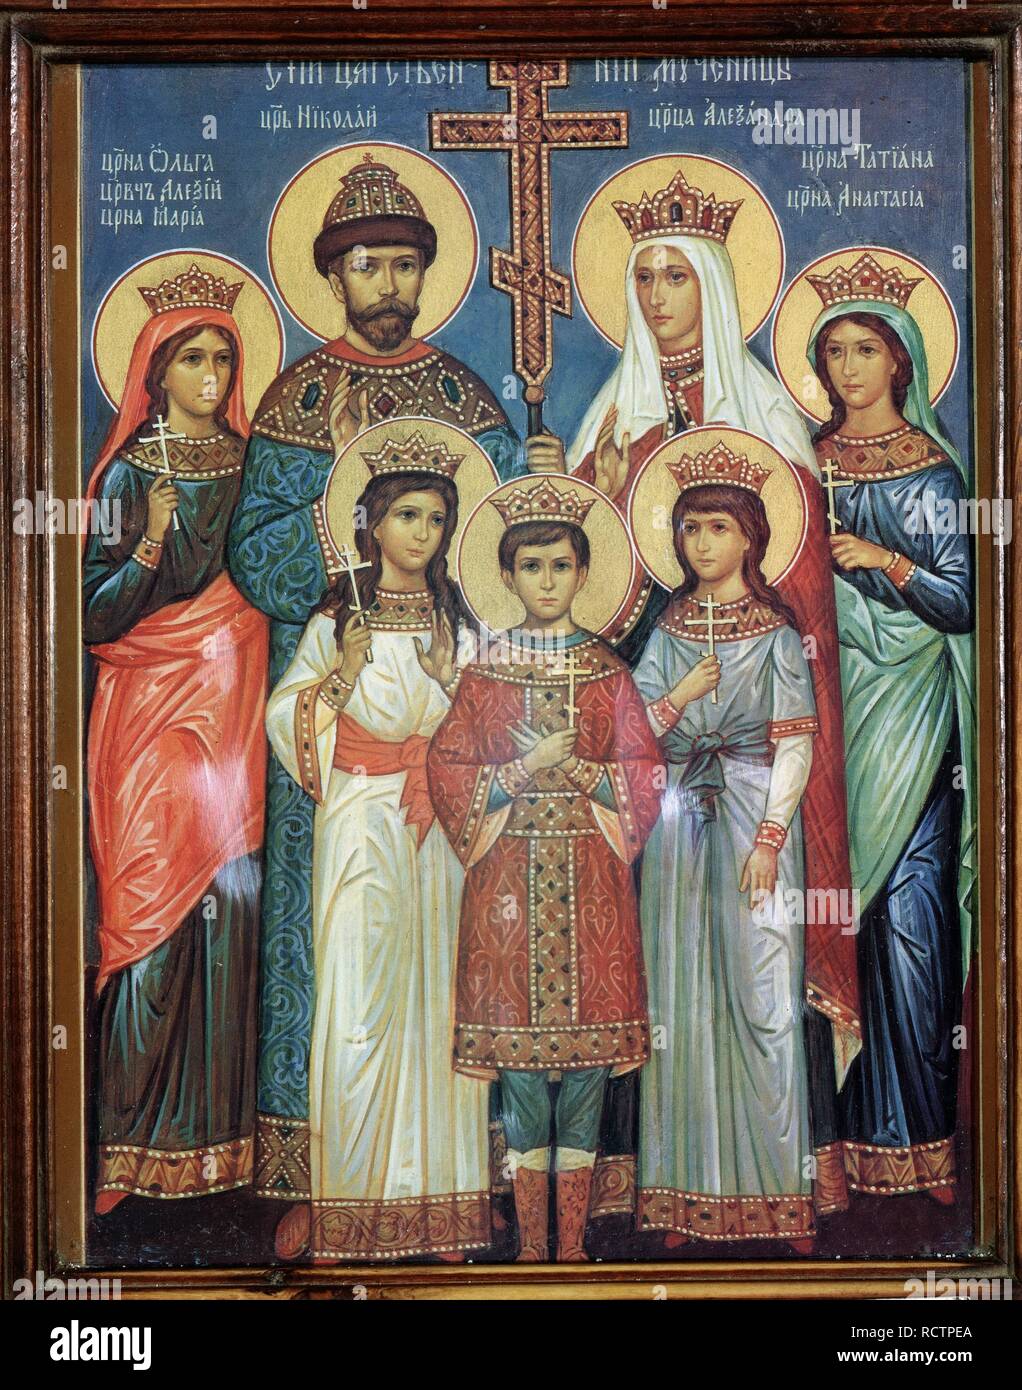 The killed Family of the Tsar Nicholas II. Museum: State Tretyakov Gallery, Moscow. Author: Russian icon. Stock Photo